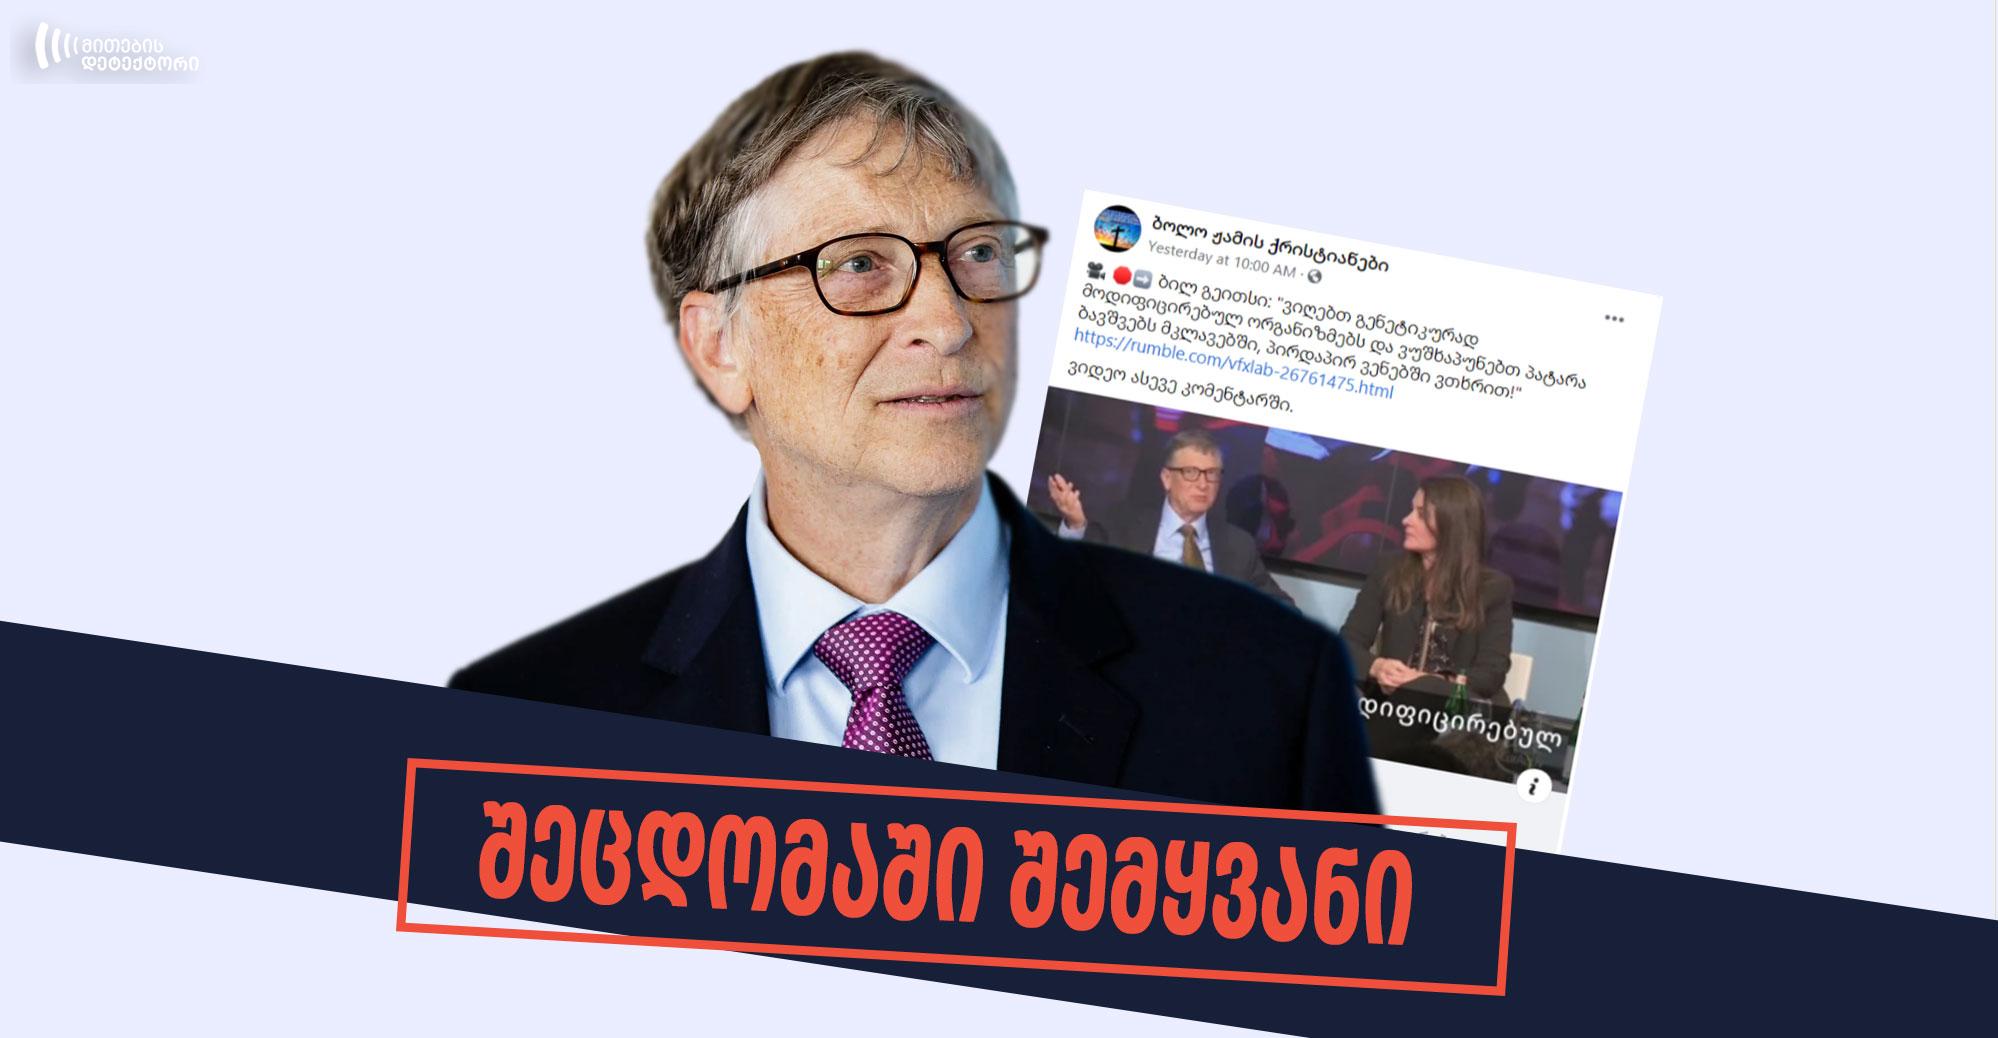 Vaccines or GMOs – How Old is Bill Gates’ Video Linked to COVID-19?